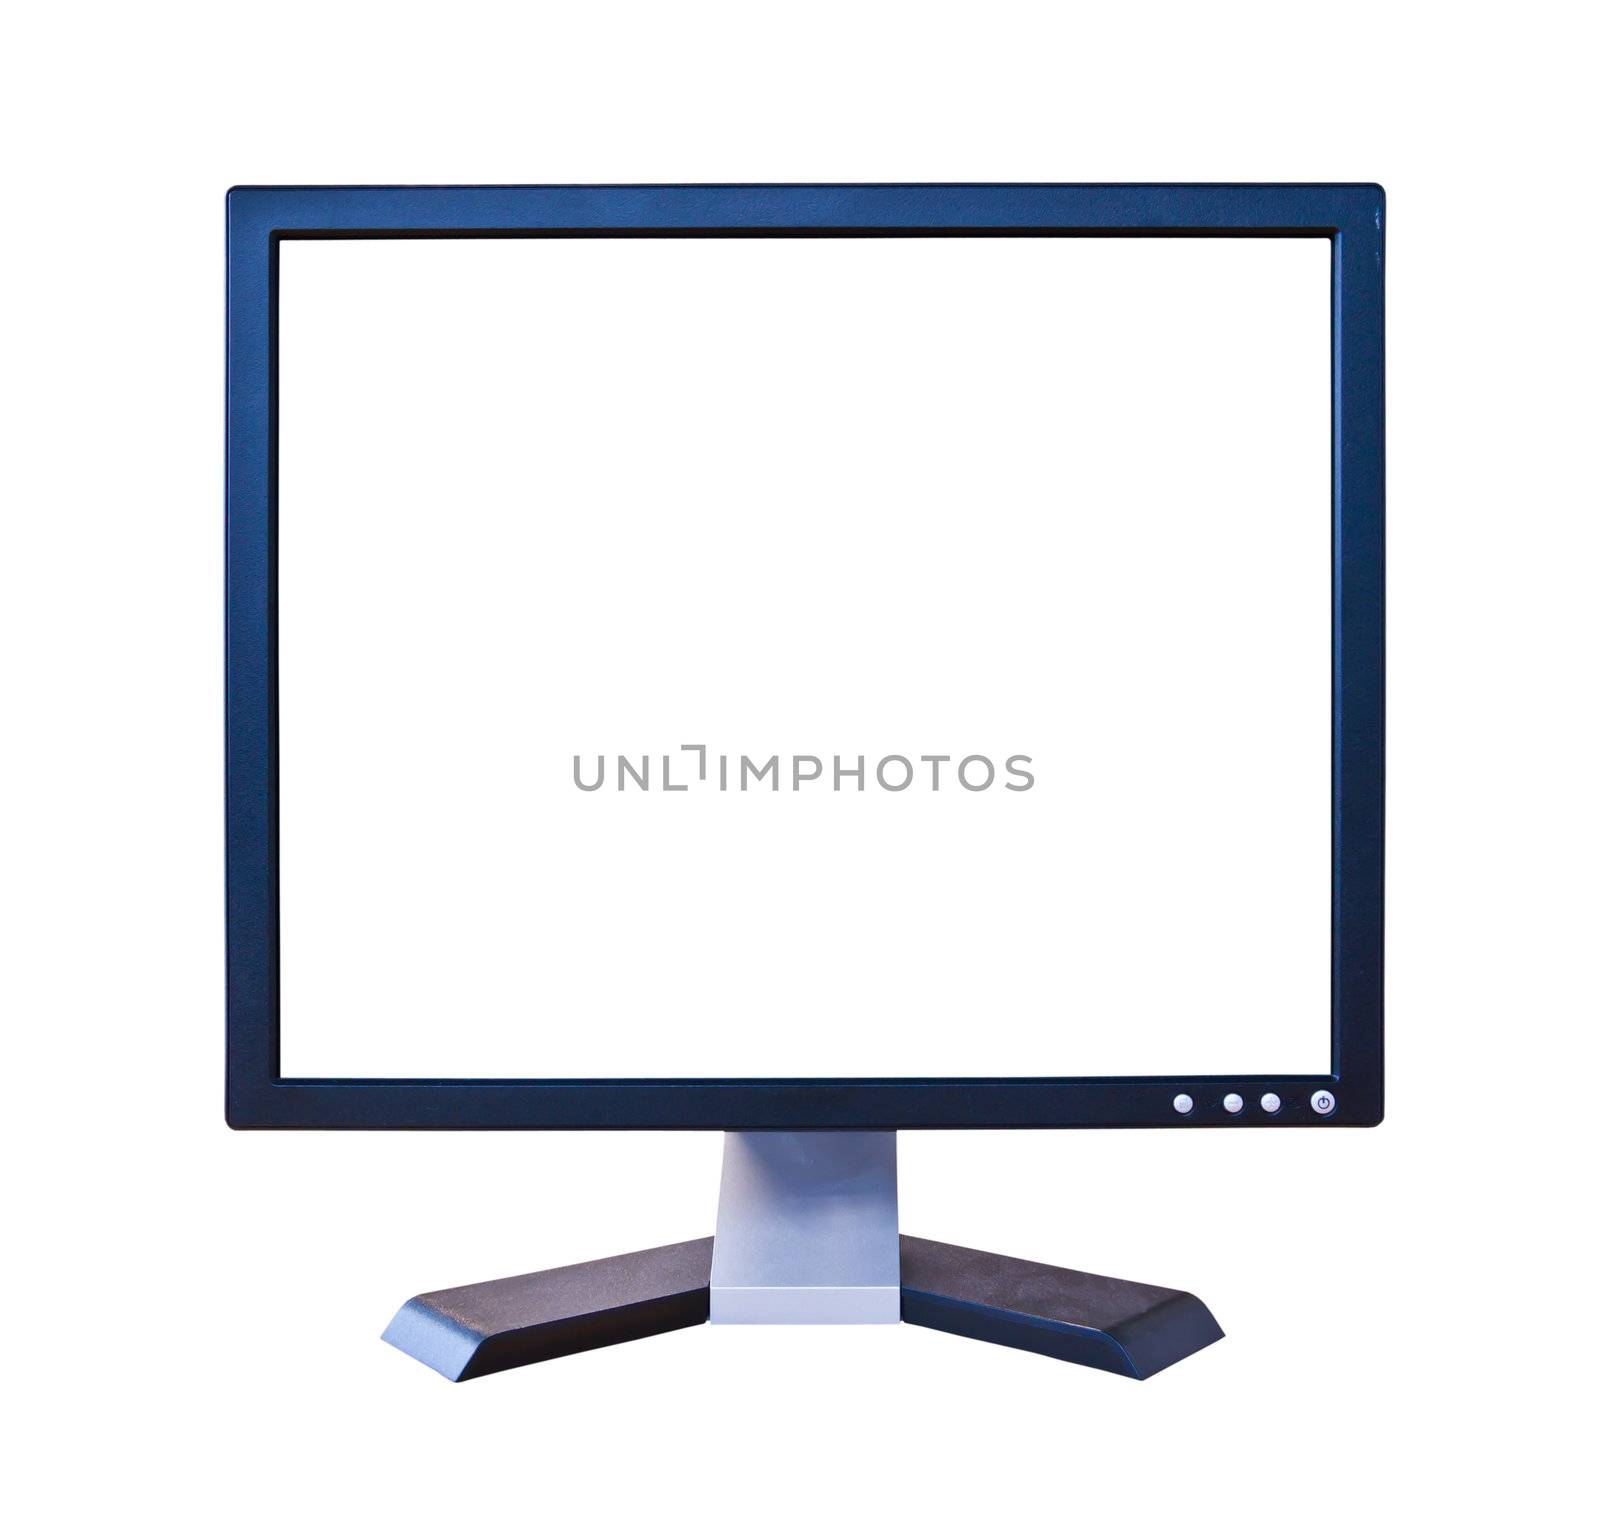 LCD Monitor with blank screen isolated by tungphoto